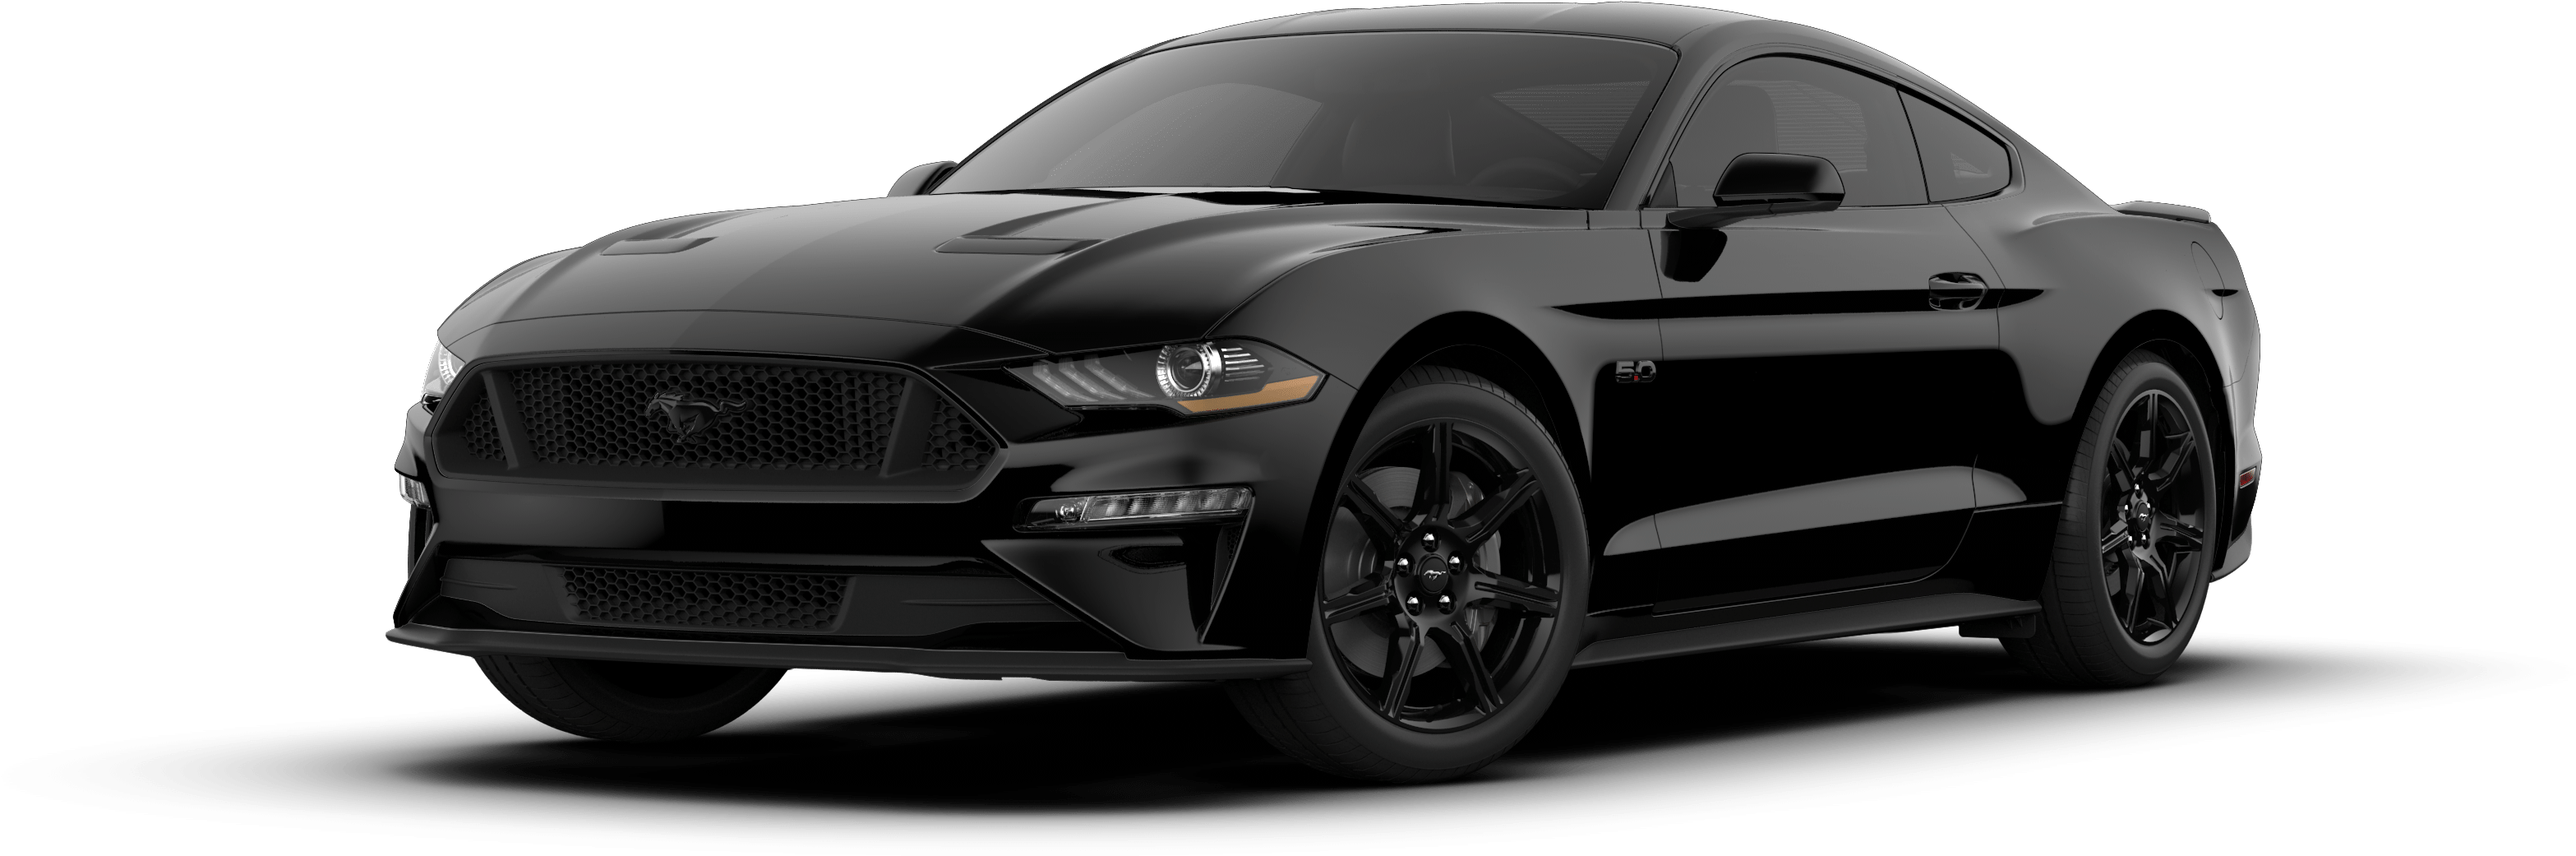 Black Ford Mustang G T Side View PNG